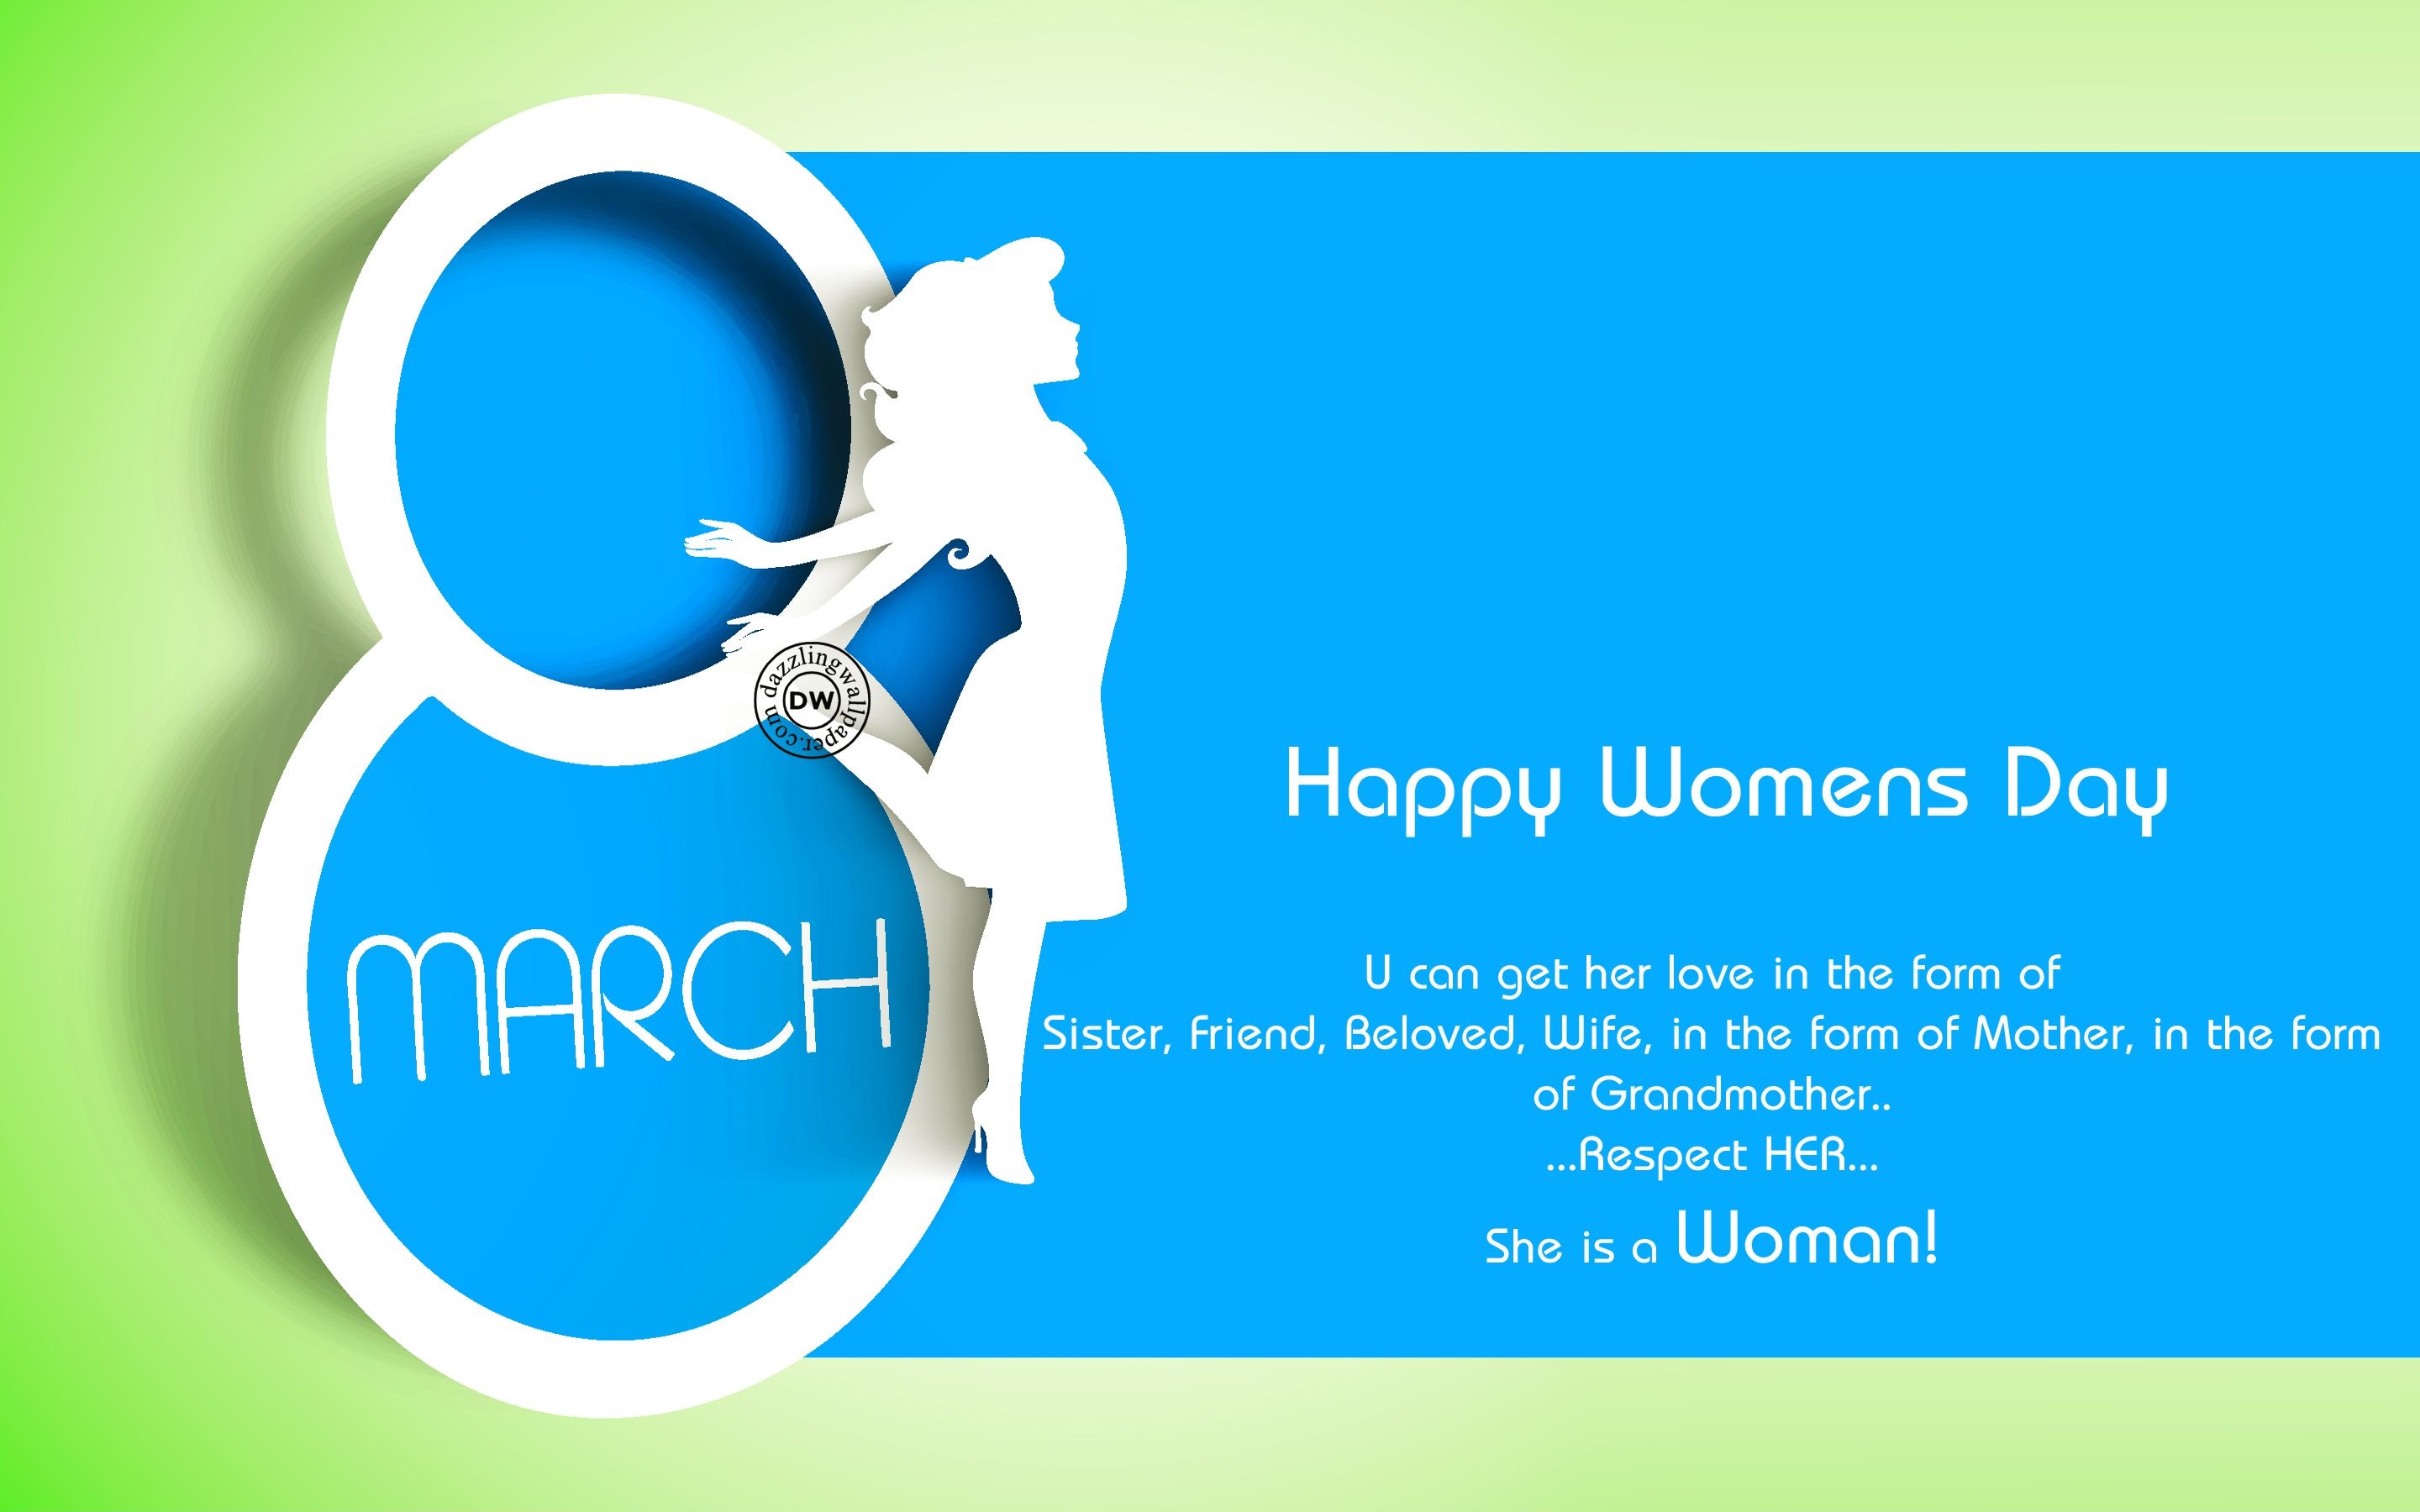 Womens Day Quotes Fb Whatsapp Status Sms Happy Womens Day Images Wishes Greetings Hd Wallpapers